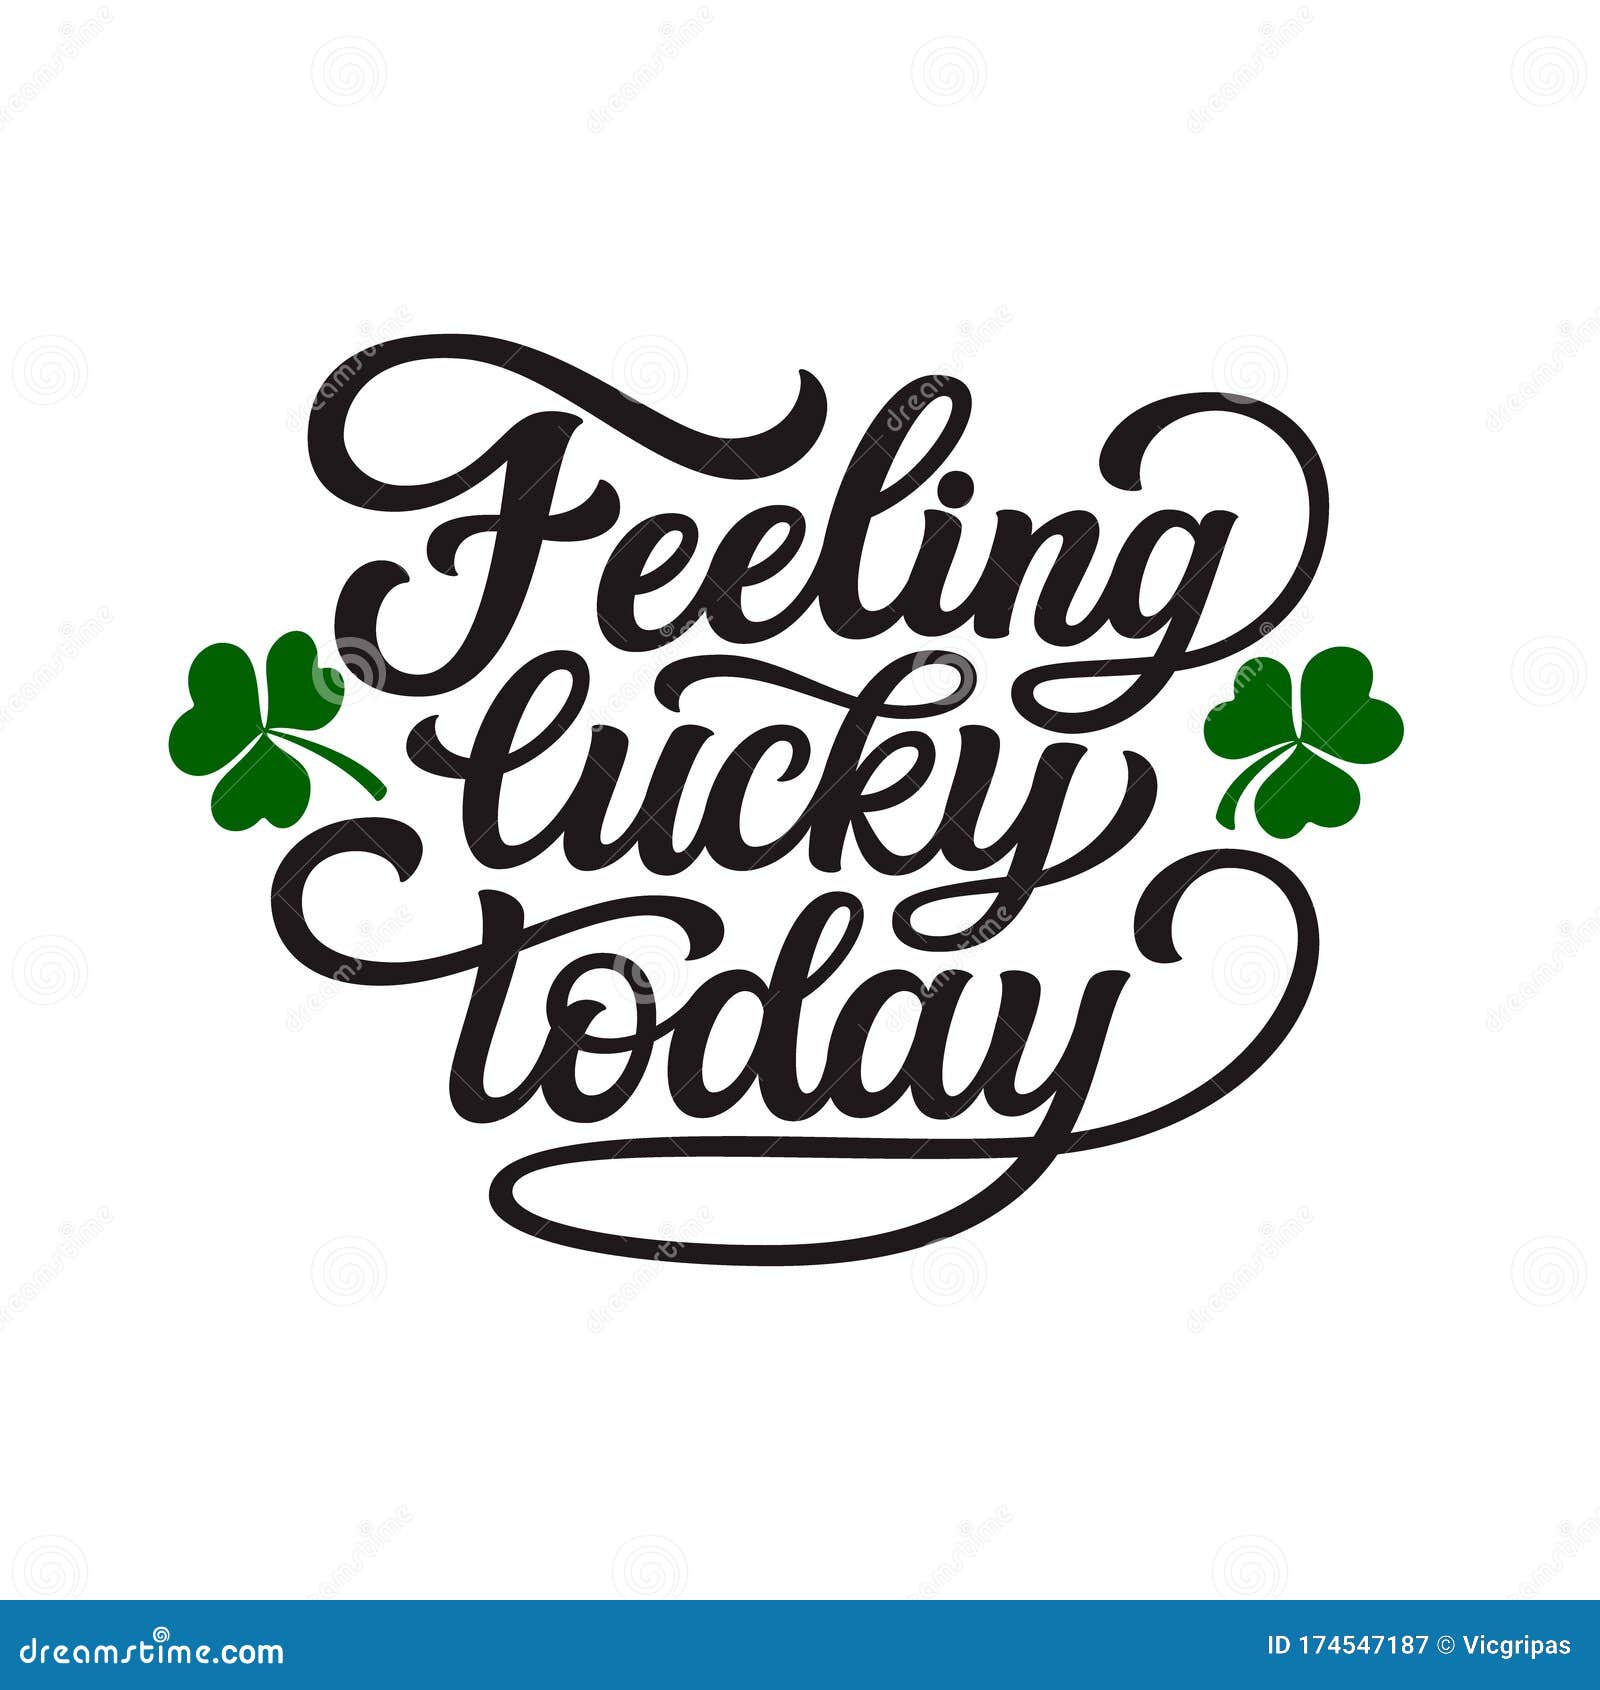 feeling lucky today poster